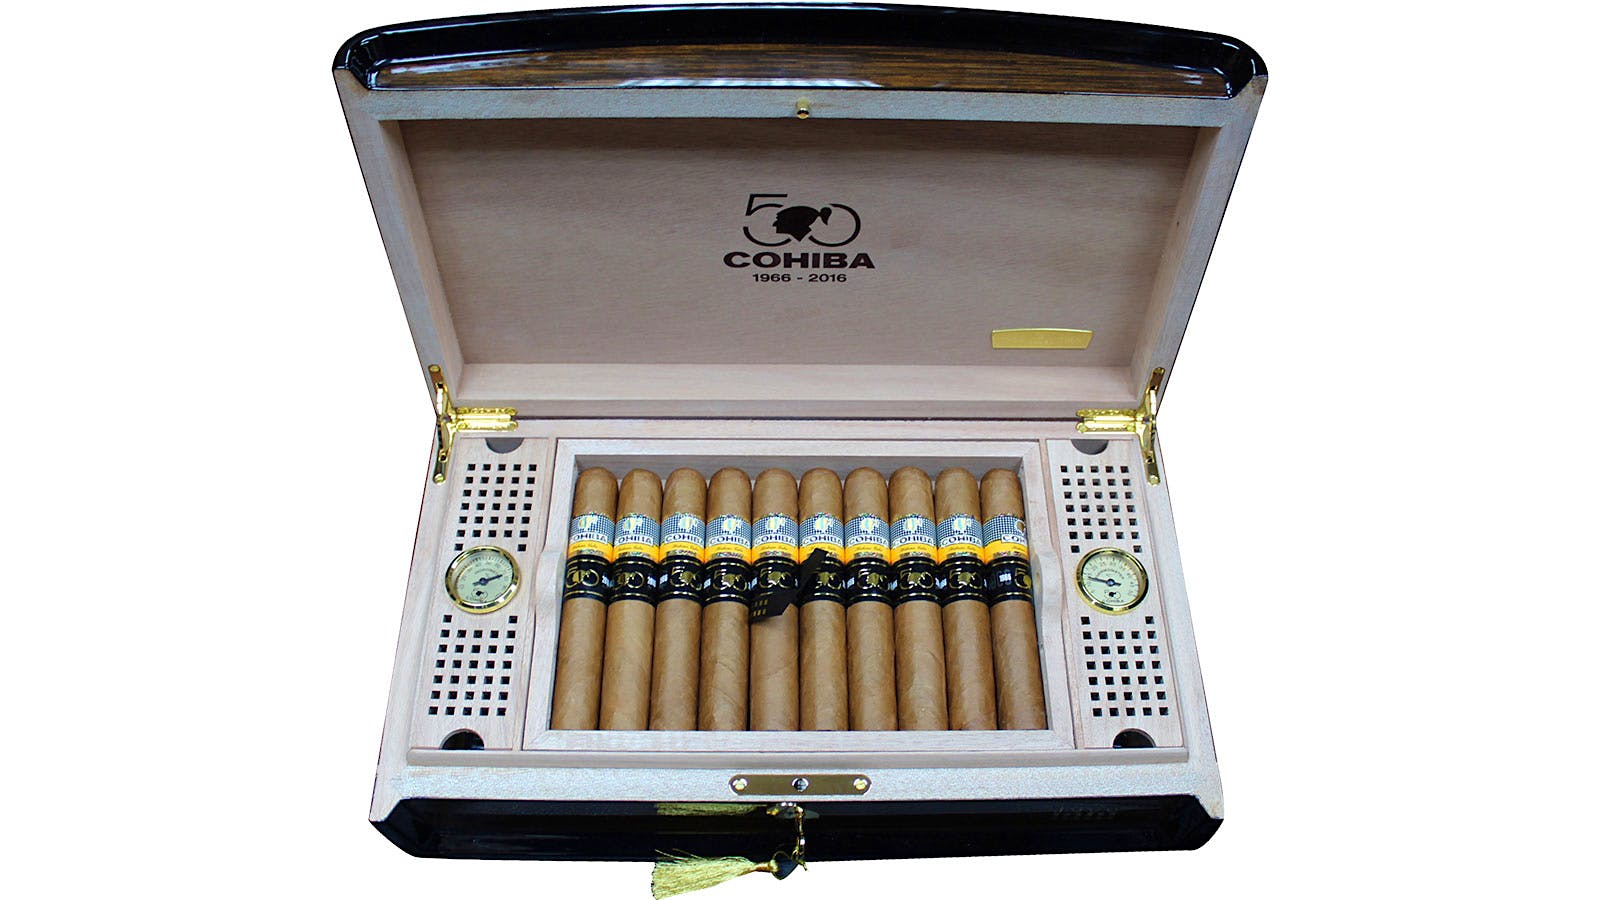 The Cohiba Majestuoso 1966 Humidors are two of 1,966 pieces made to celebrate the 50th anniversary of the brand.